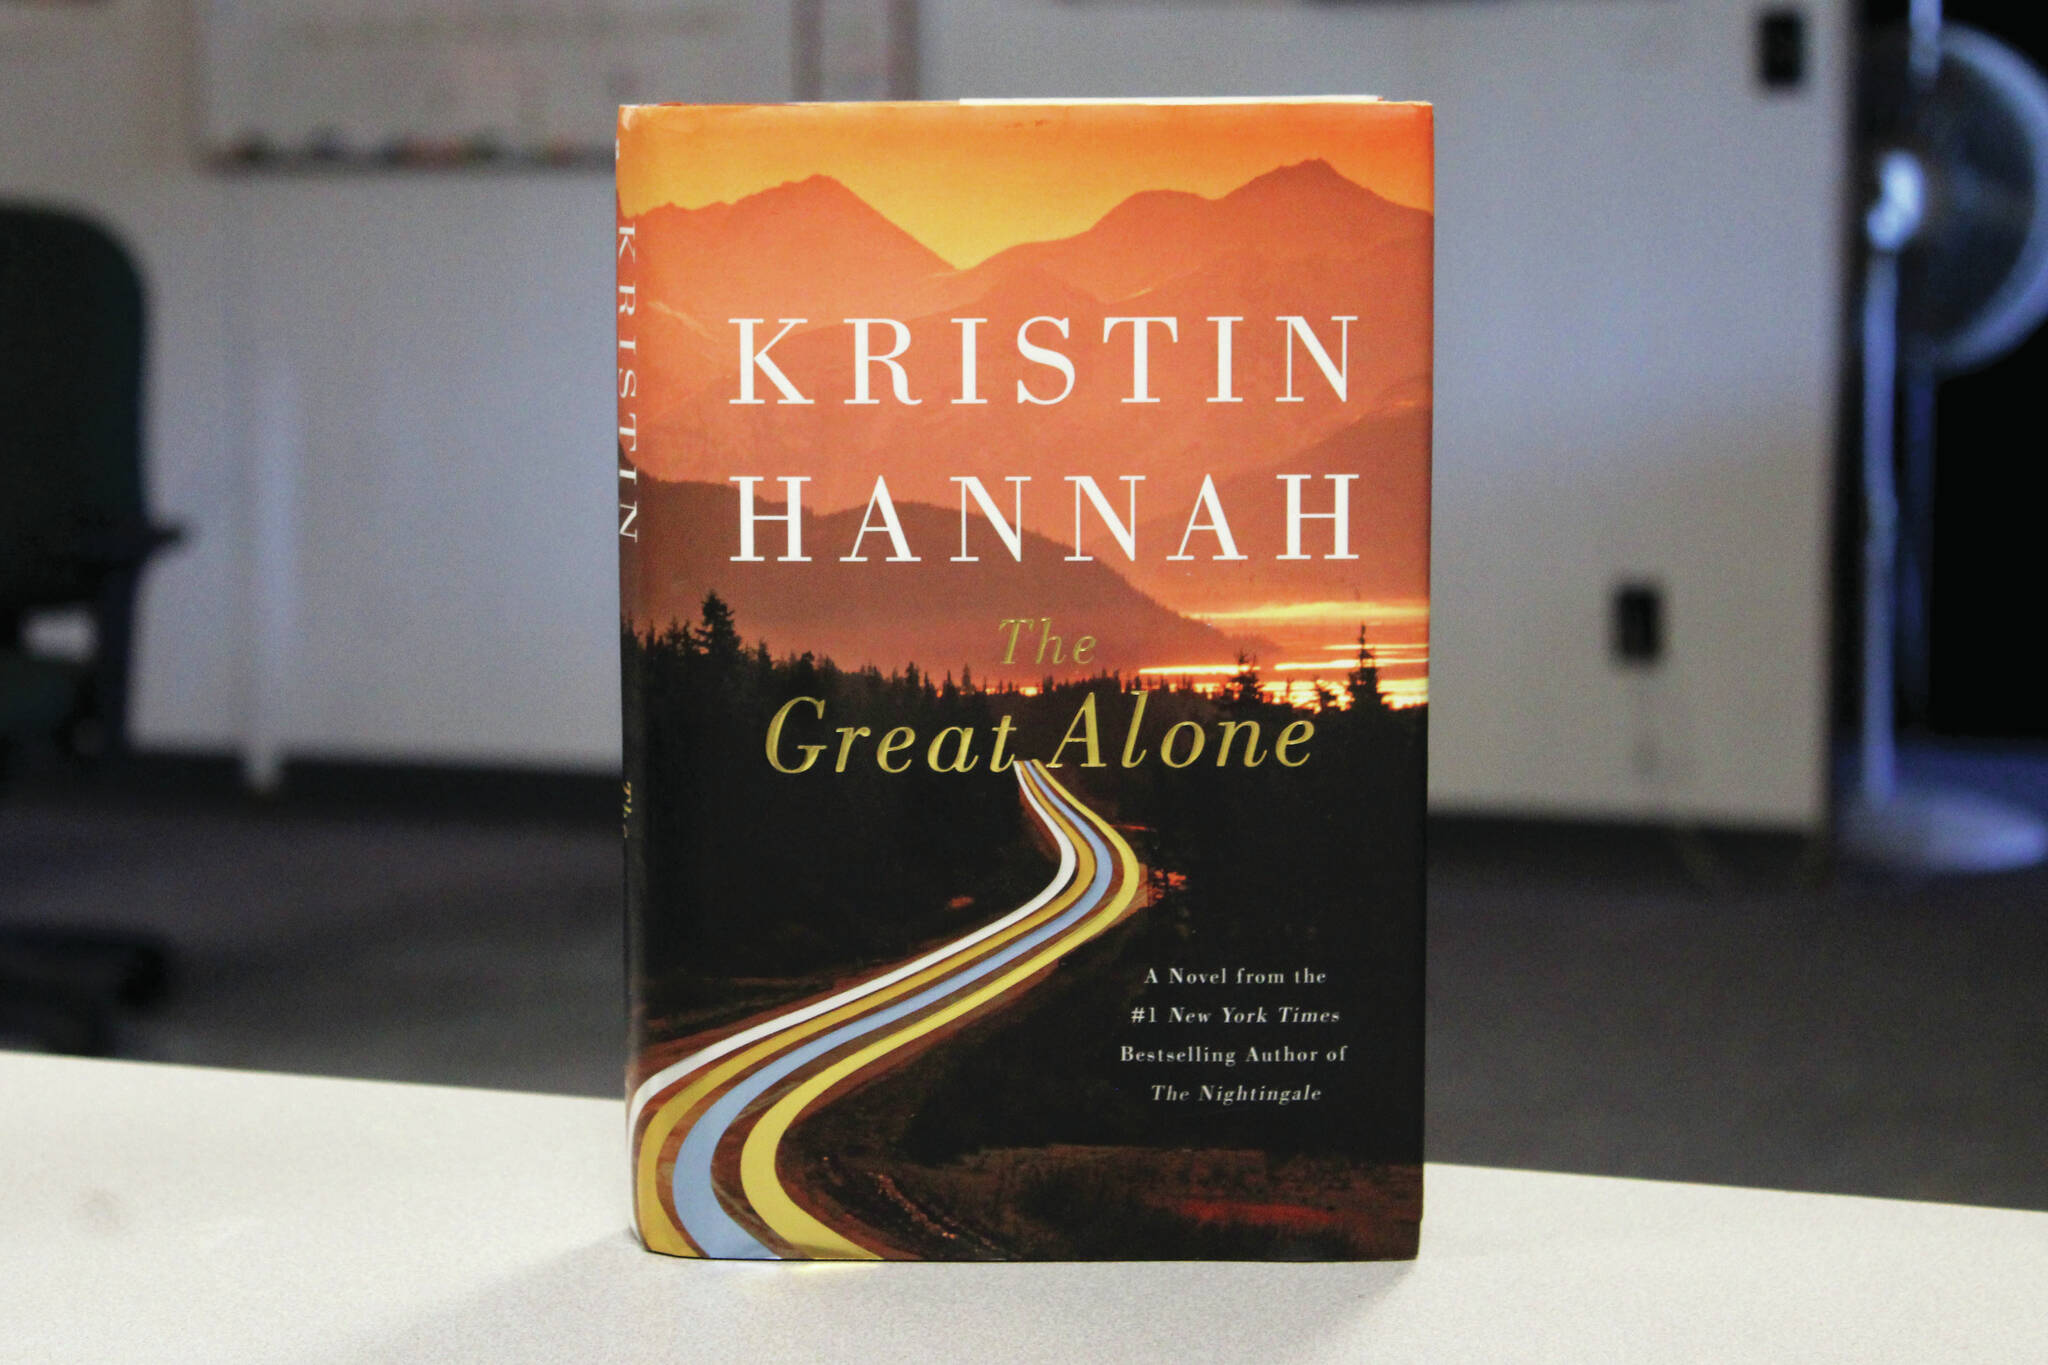 Ashlyn O’Hara/Peninsula Clarion
A copy of “The Great Alone” sits on a desk in the Peninsula Clarion offices on Thursday in Kenai.